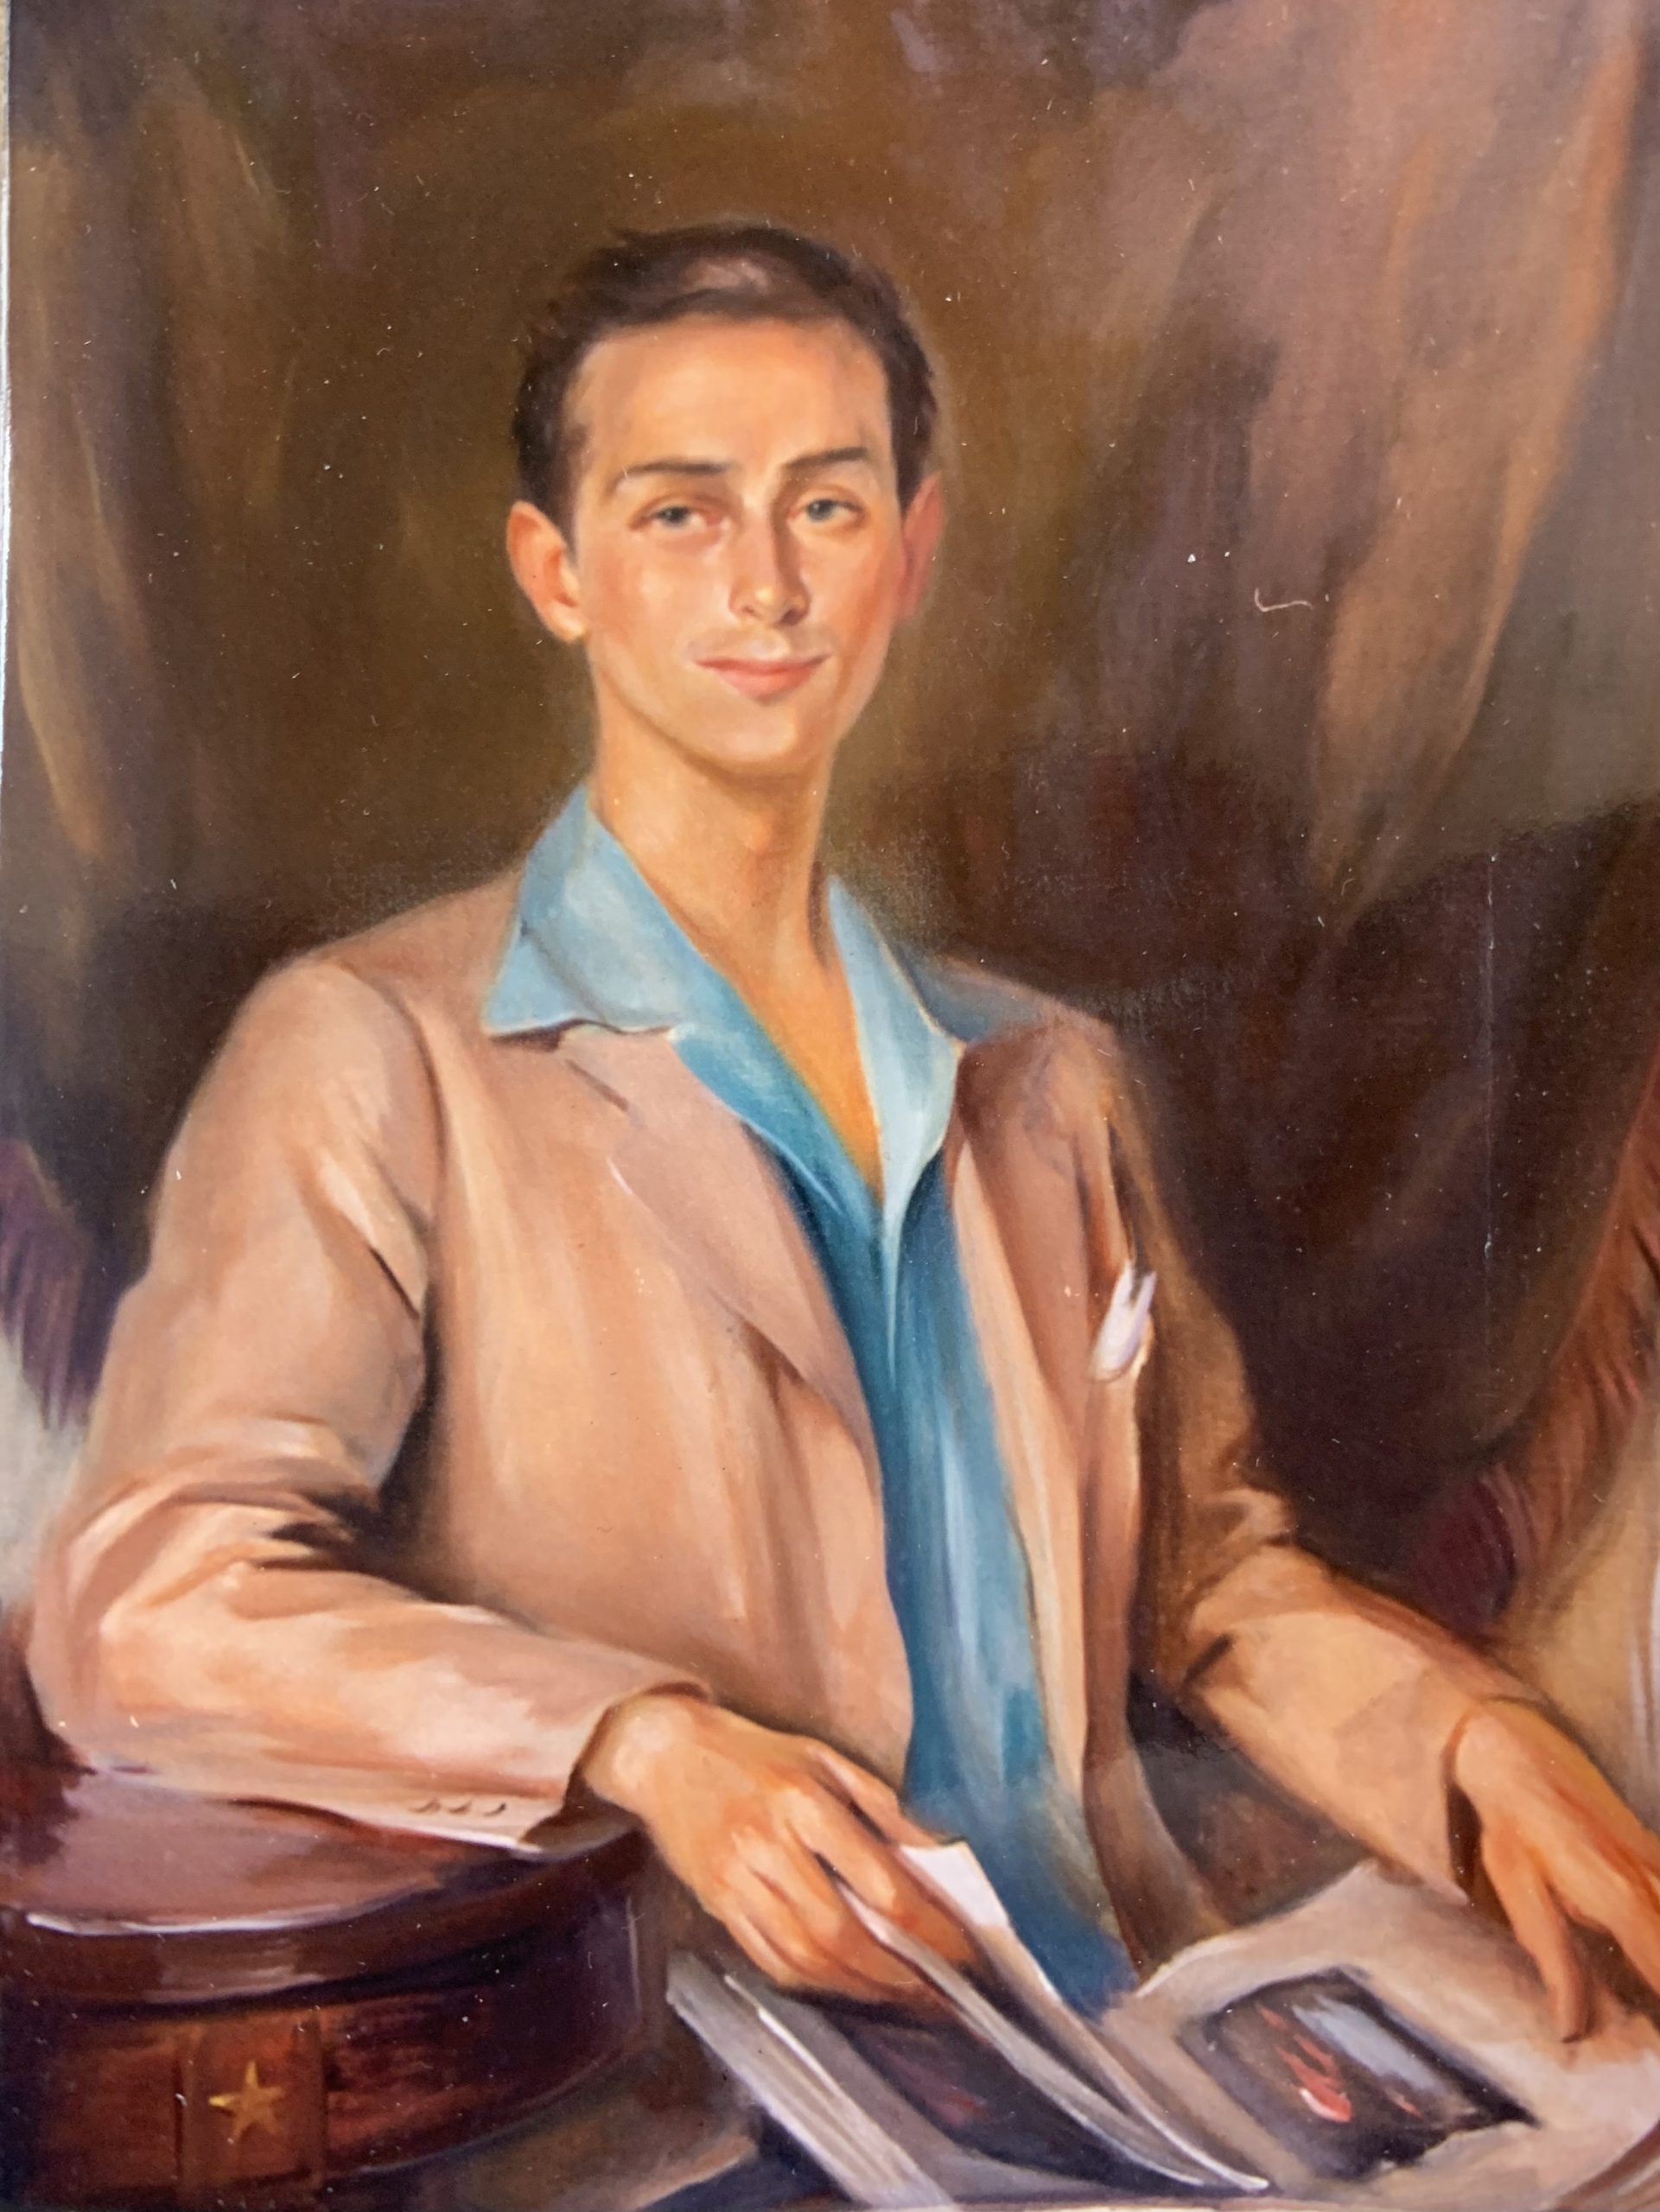 William “Billy” David Eppes as a young man. Portrait by William Maltby Sykes 1940